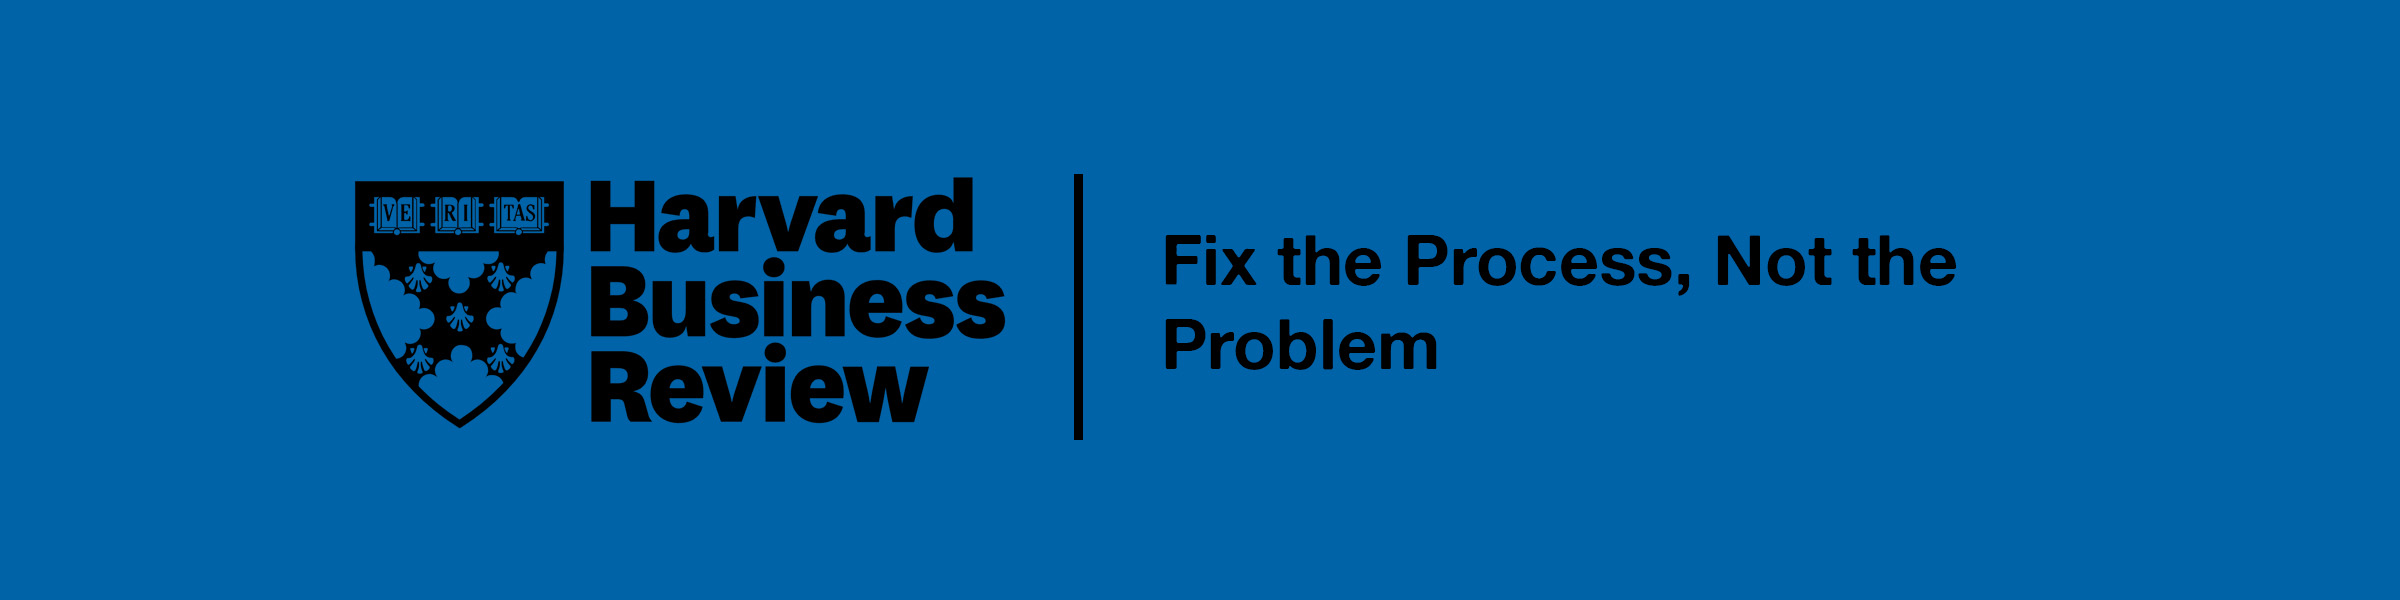 Fix the Process, Not the Problem